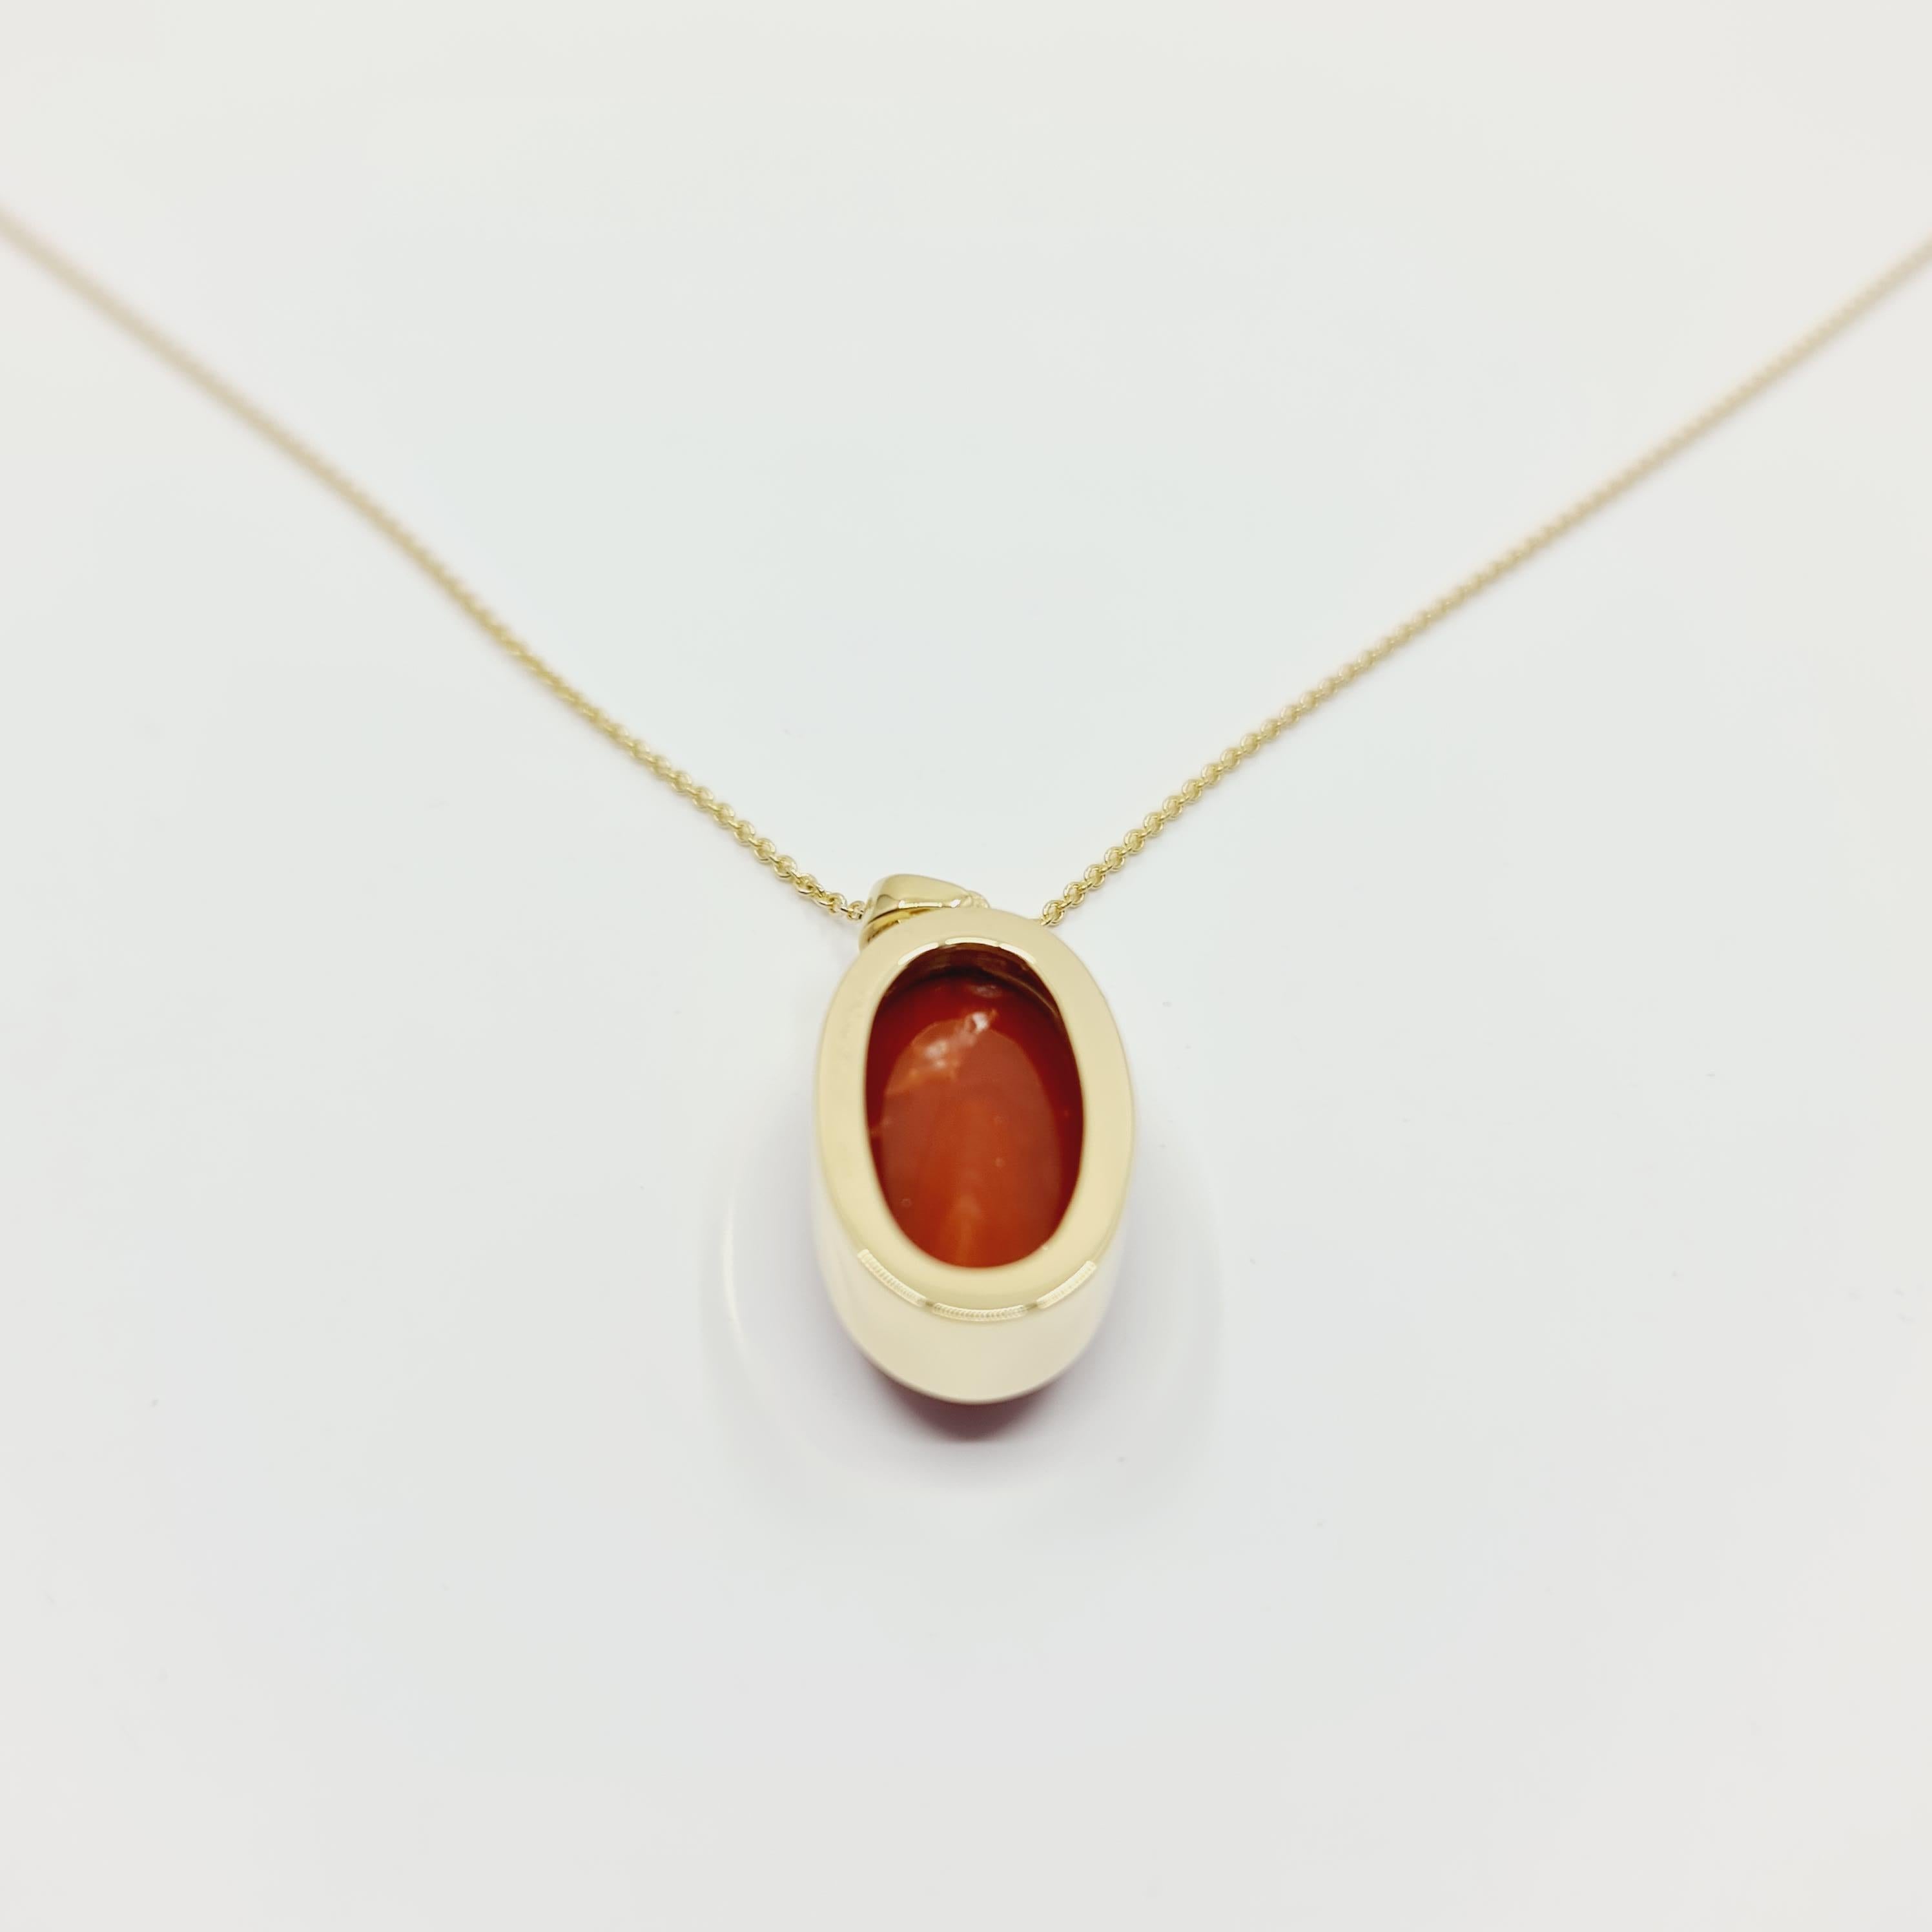 14k Gold Necklace with Oval Cut Natural Coral 13.3 Ct. For Sale 4